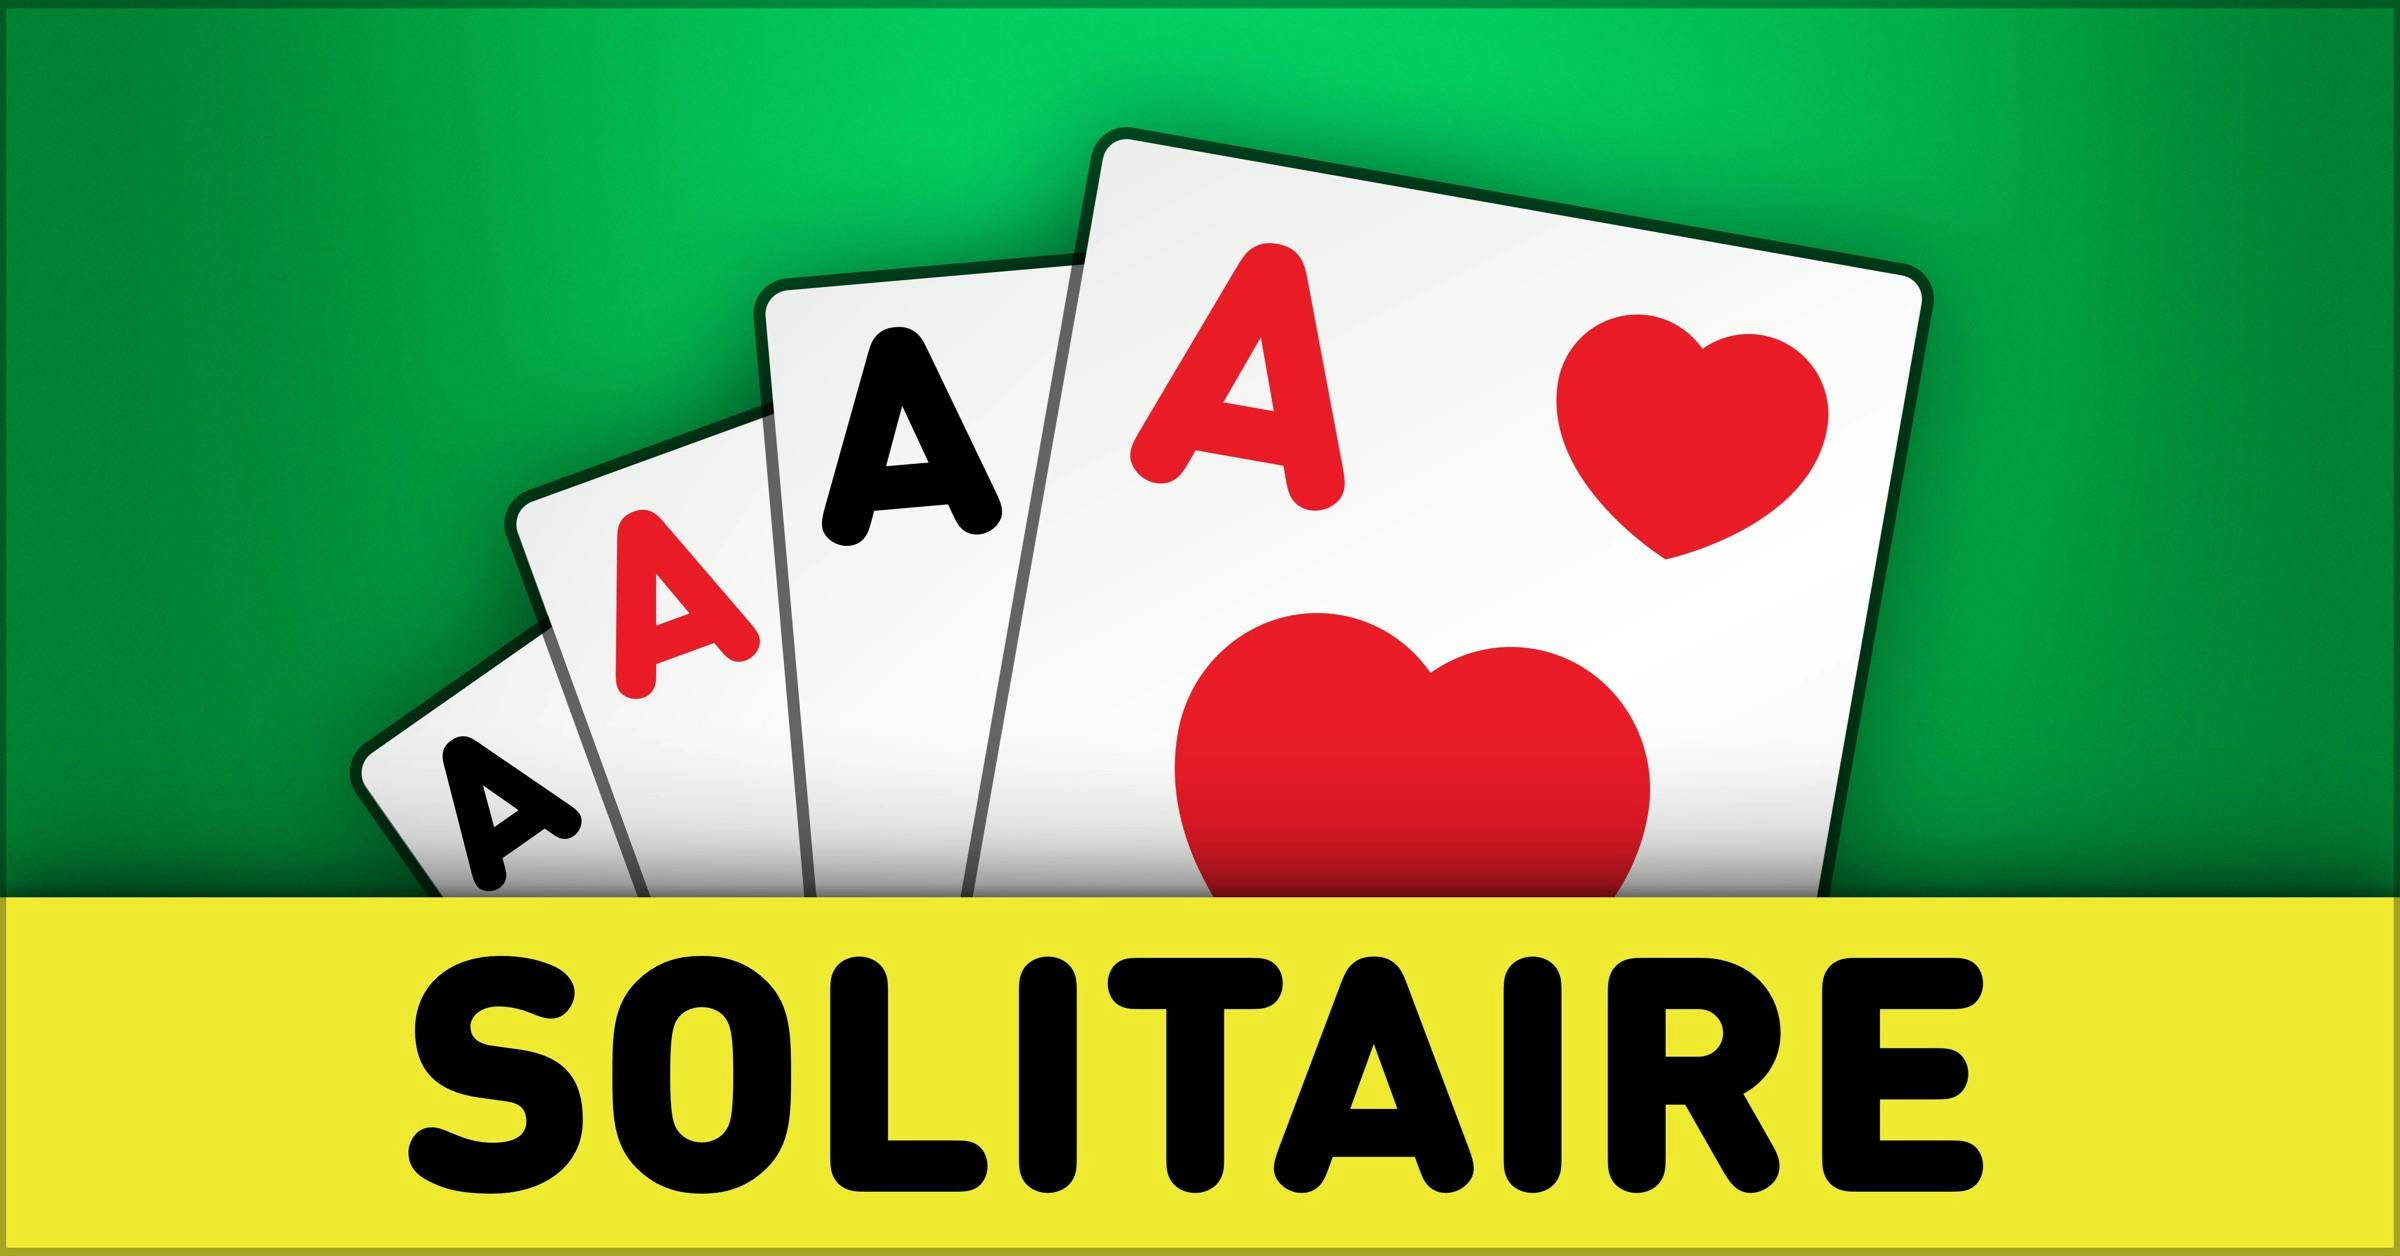 We've partnered up with Online-Solitaire.com